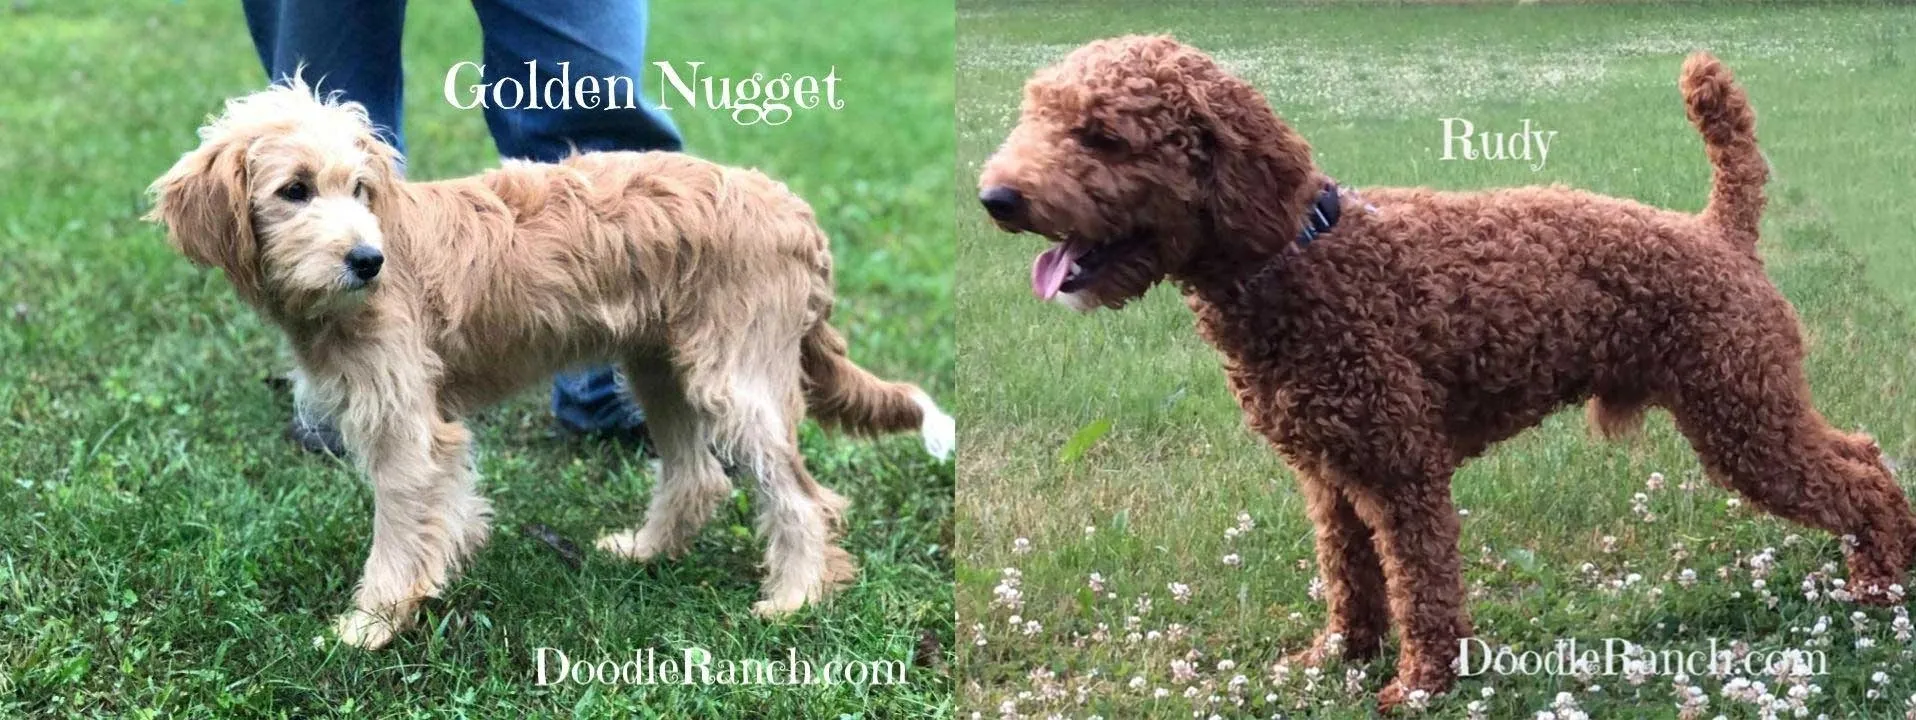 Two different doodle dogs standing on grass, named golden nugget and rudy, with their names and a website caption above them.